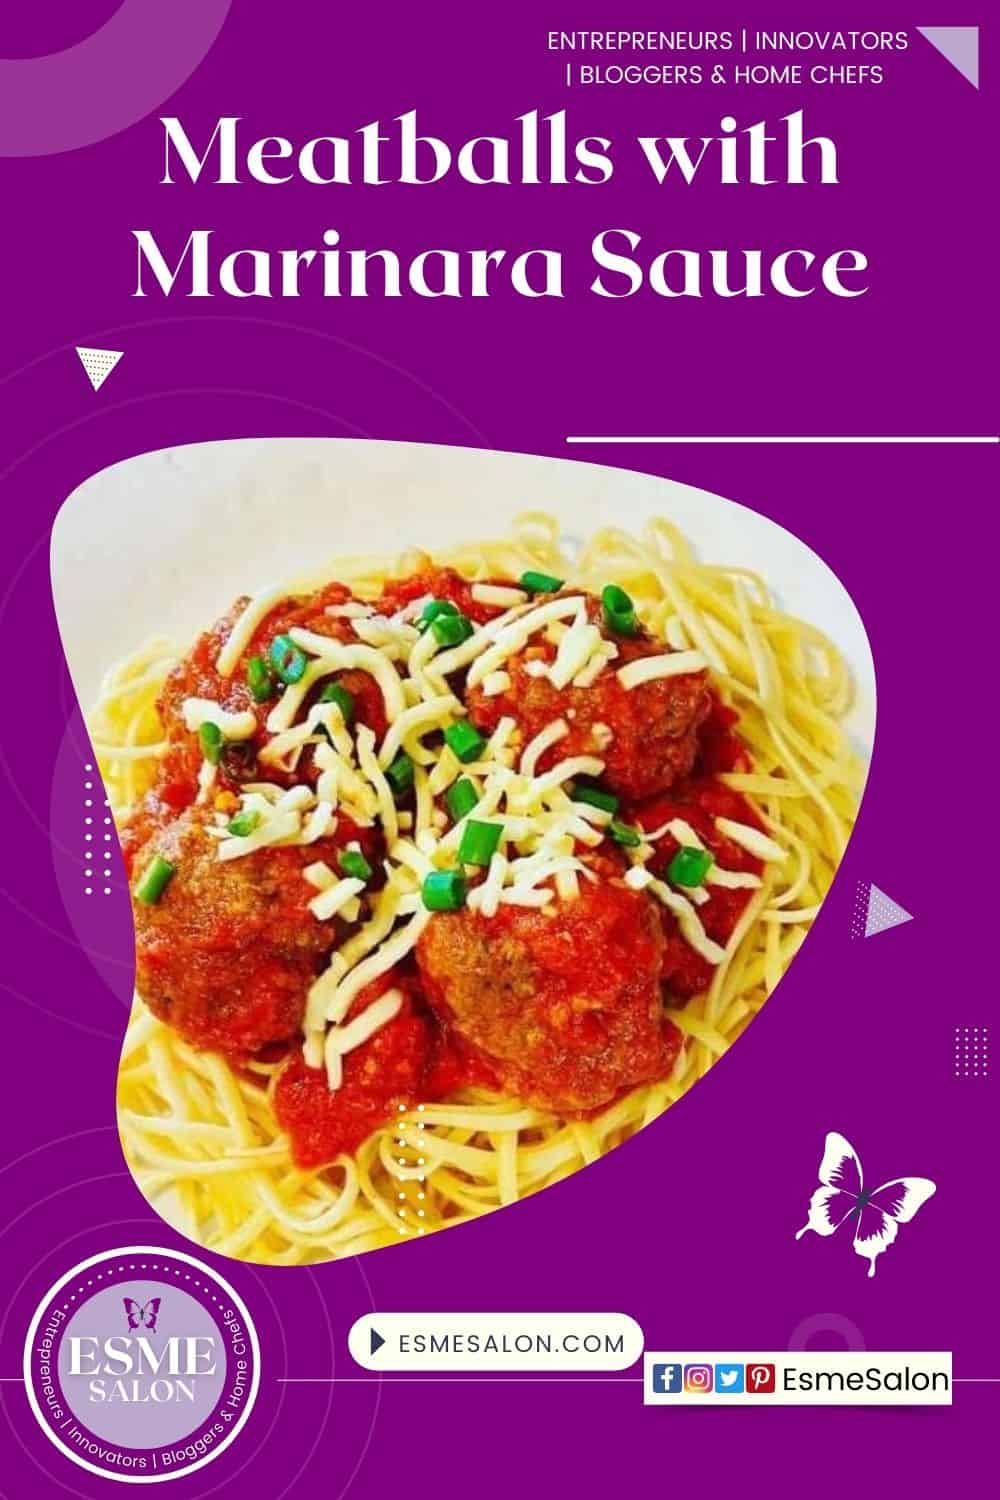 An image of a plate of pasta topped with meatballs and marinara sauce